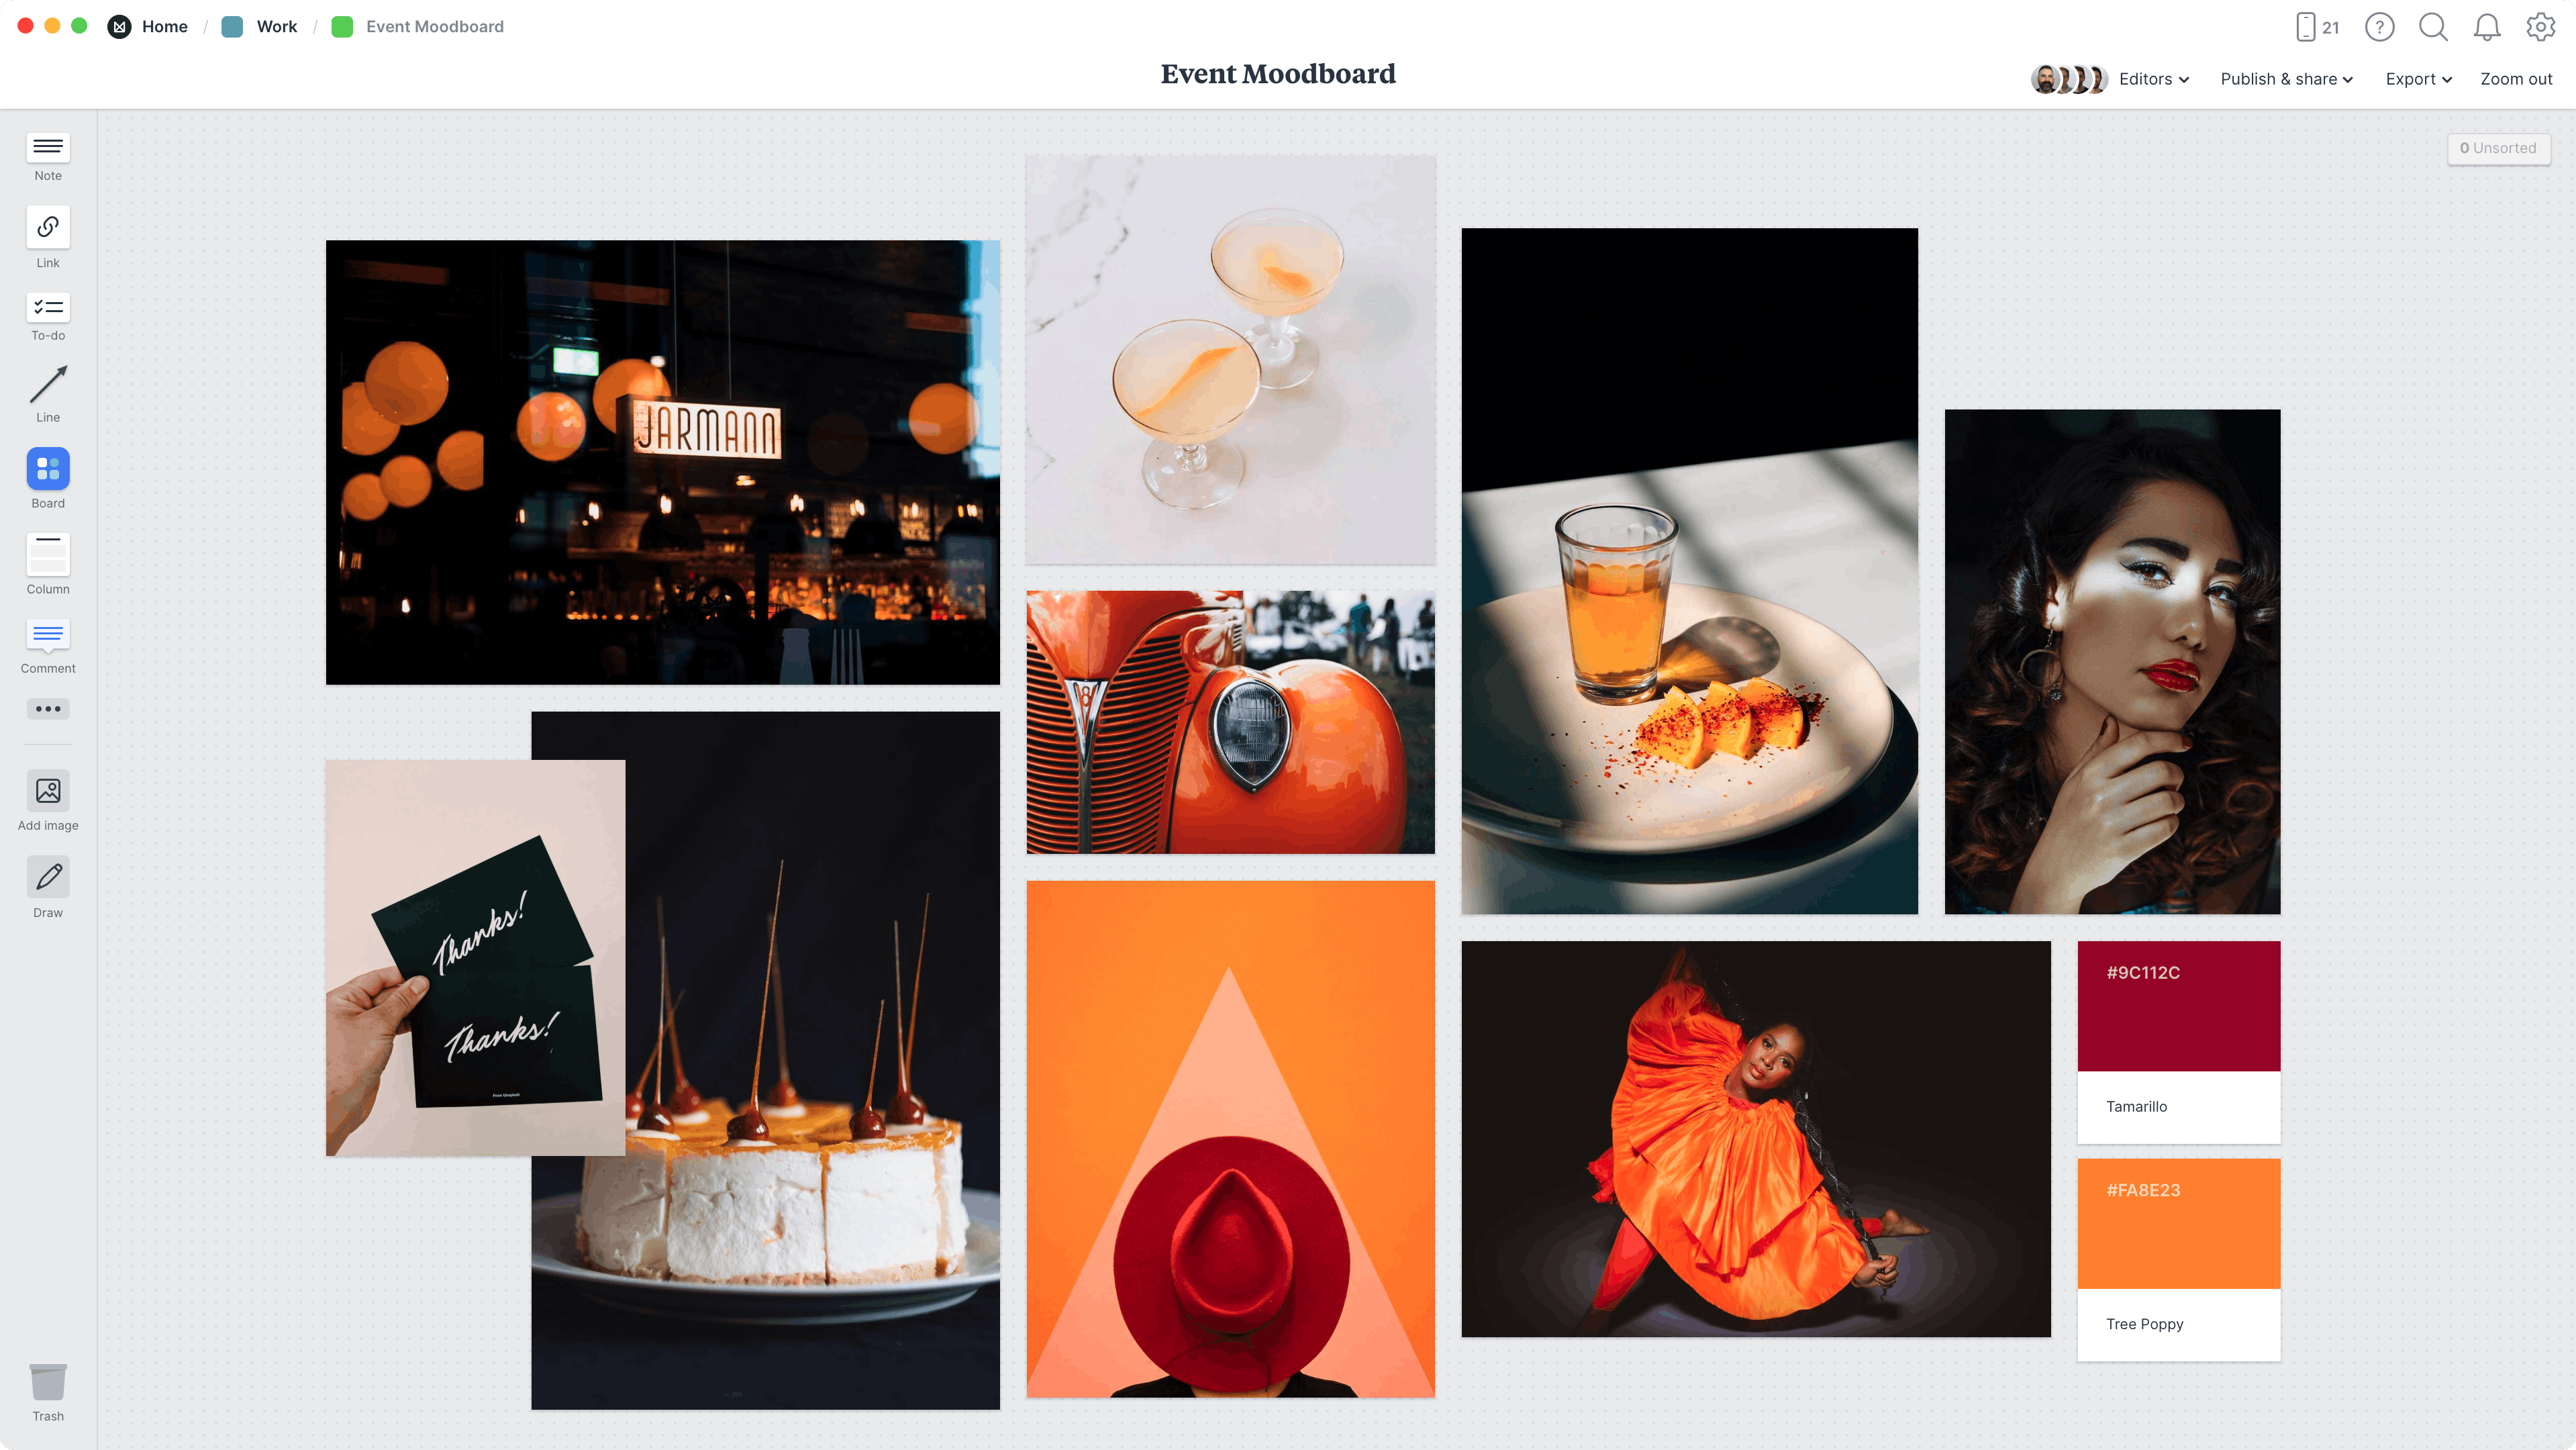 Vision Board Template & Example - Milanote